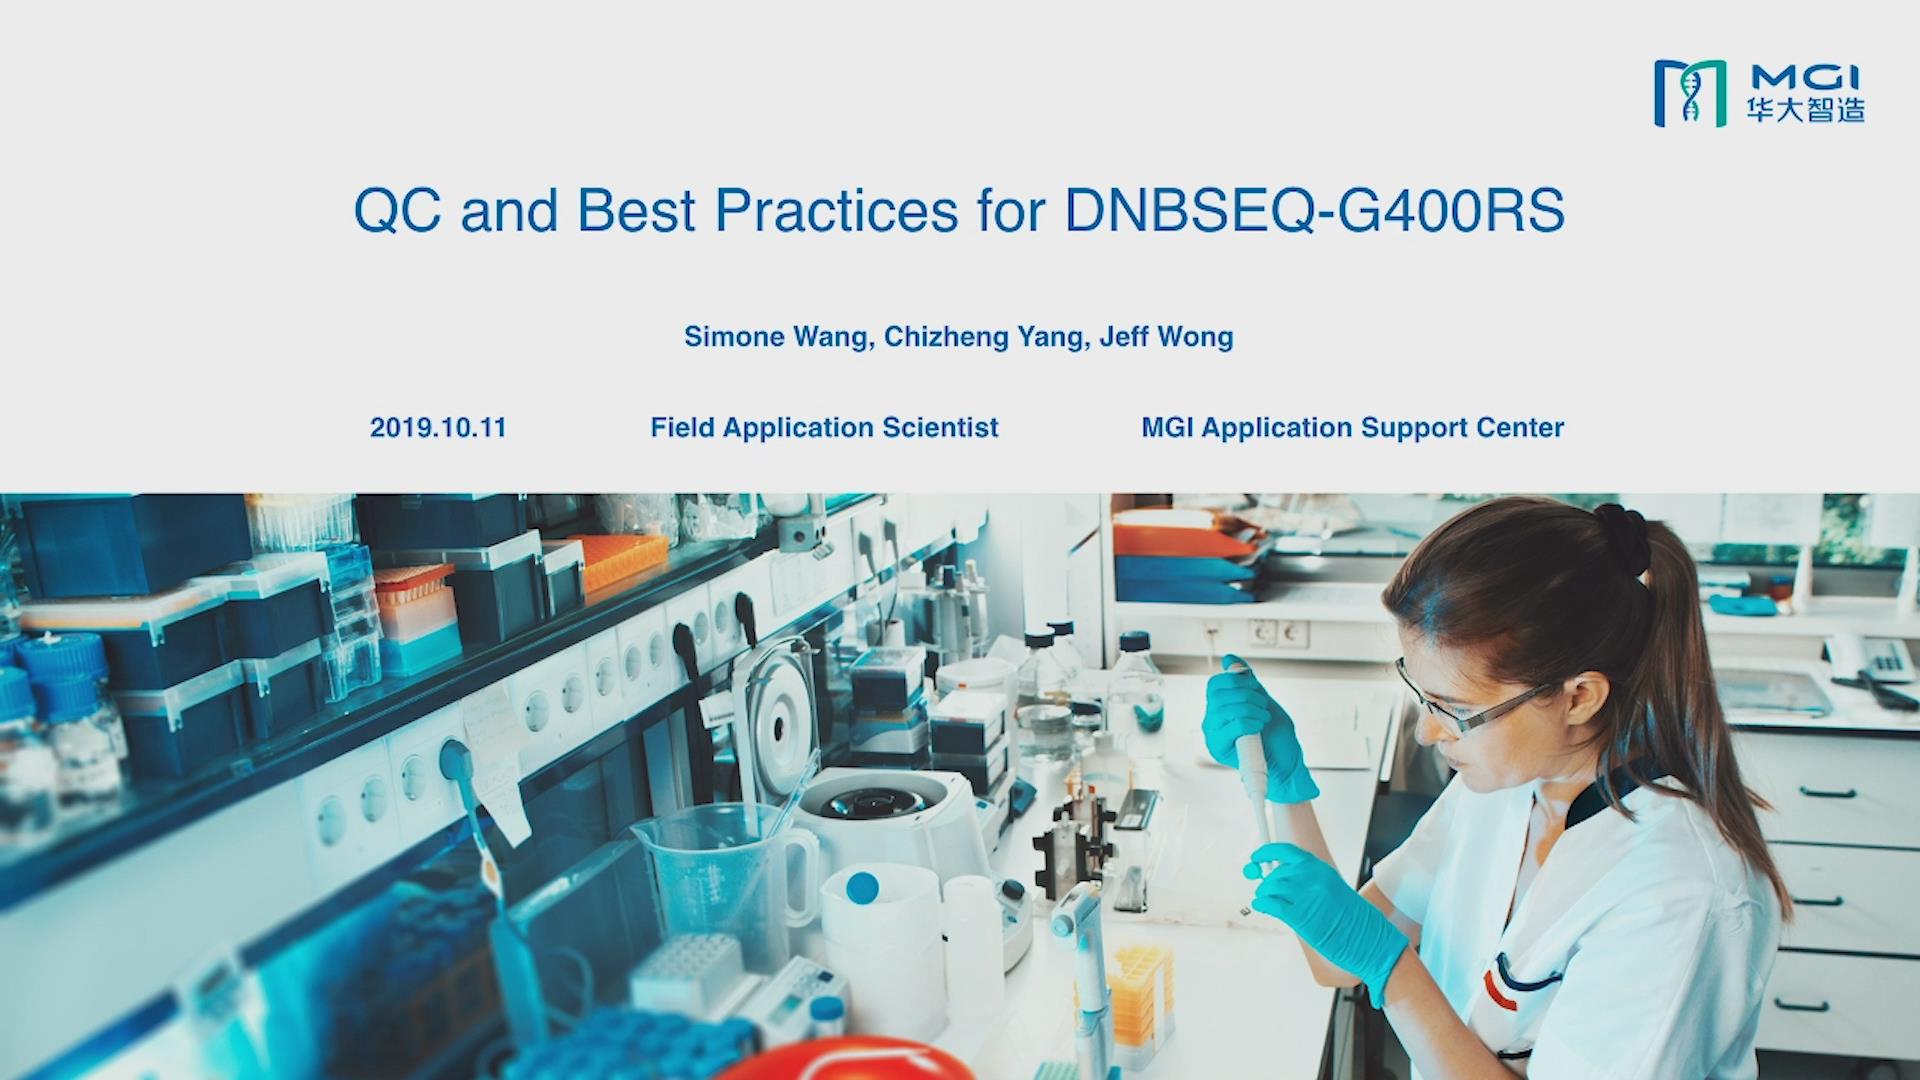 Quality Control for DNBSEQ™ Platforms and Best Practices for DNBSEQ-G400RS